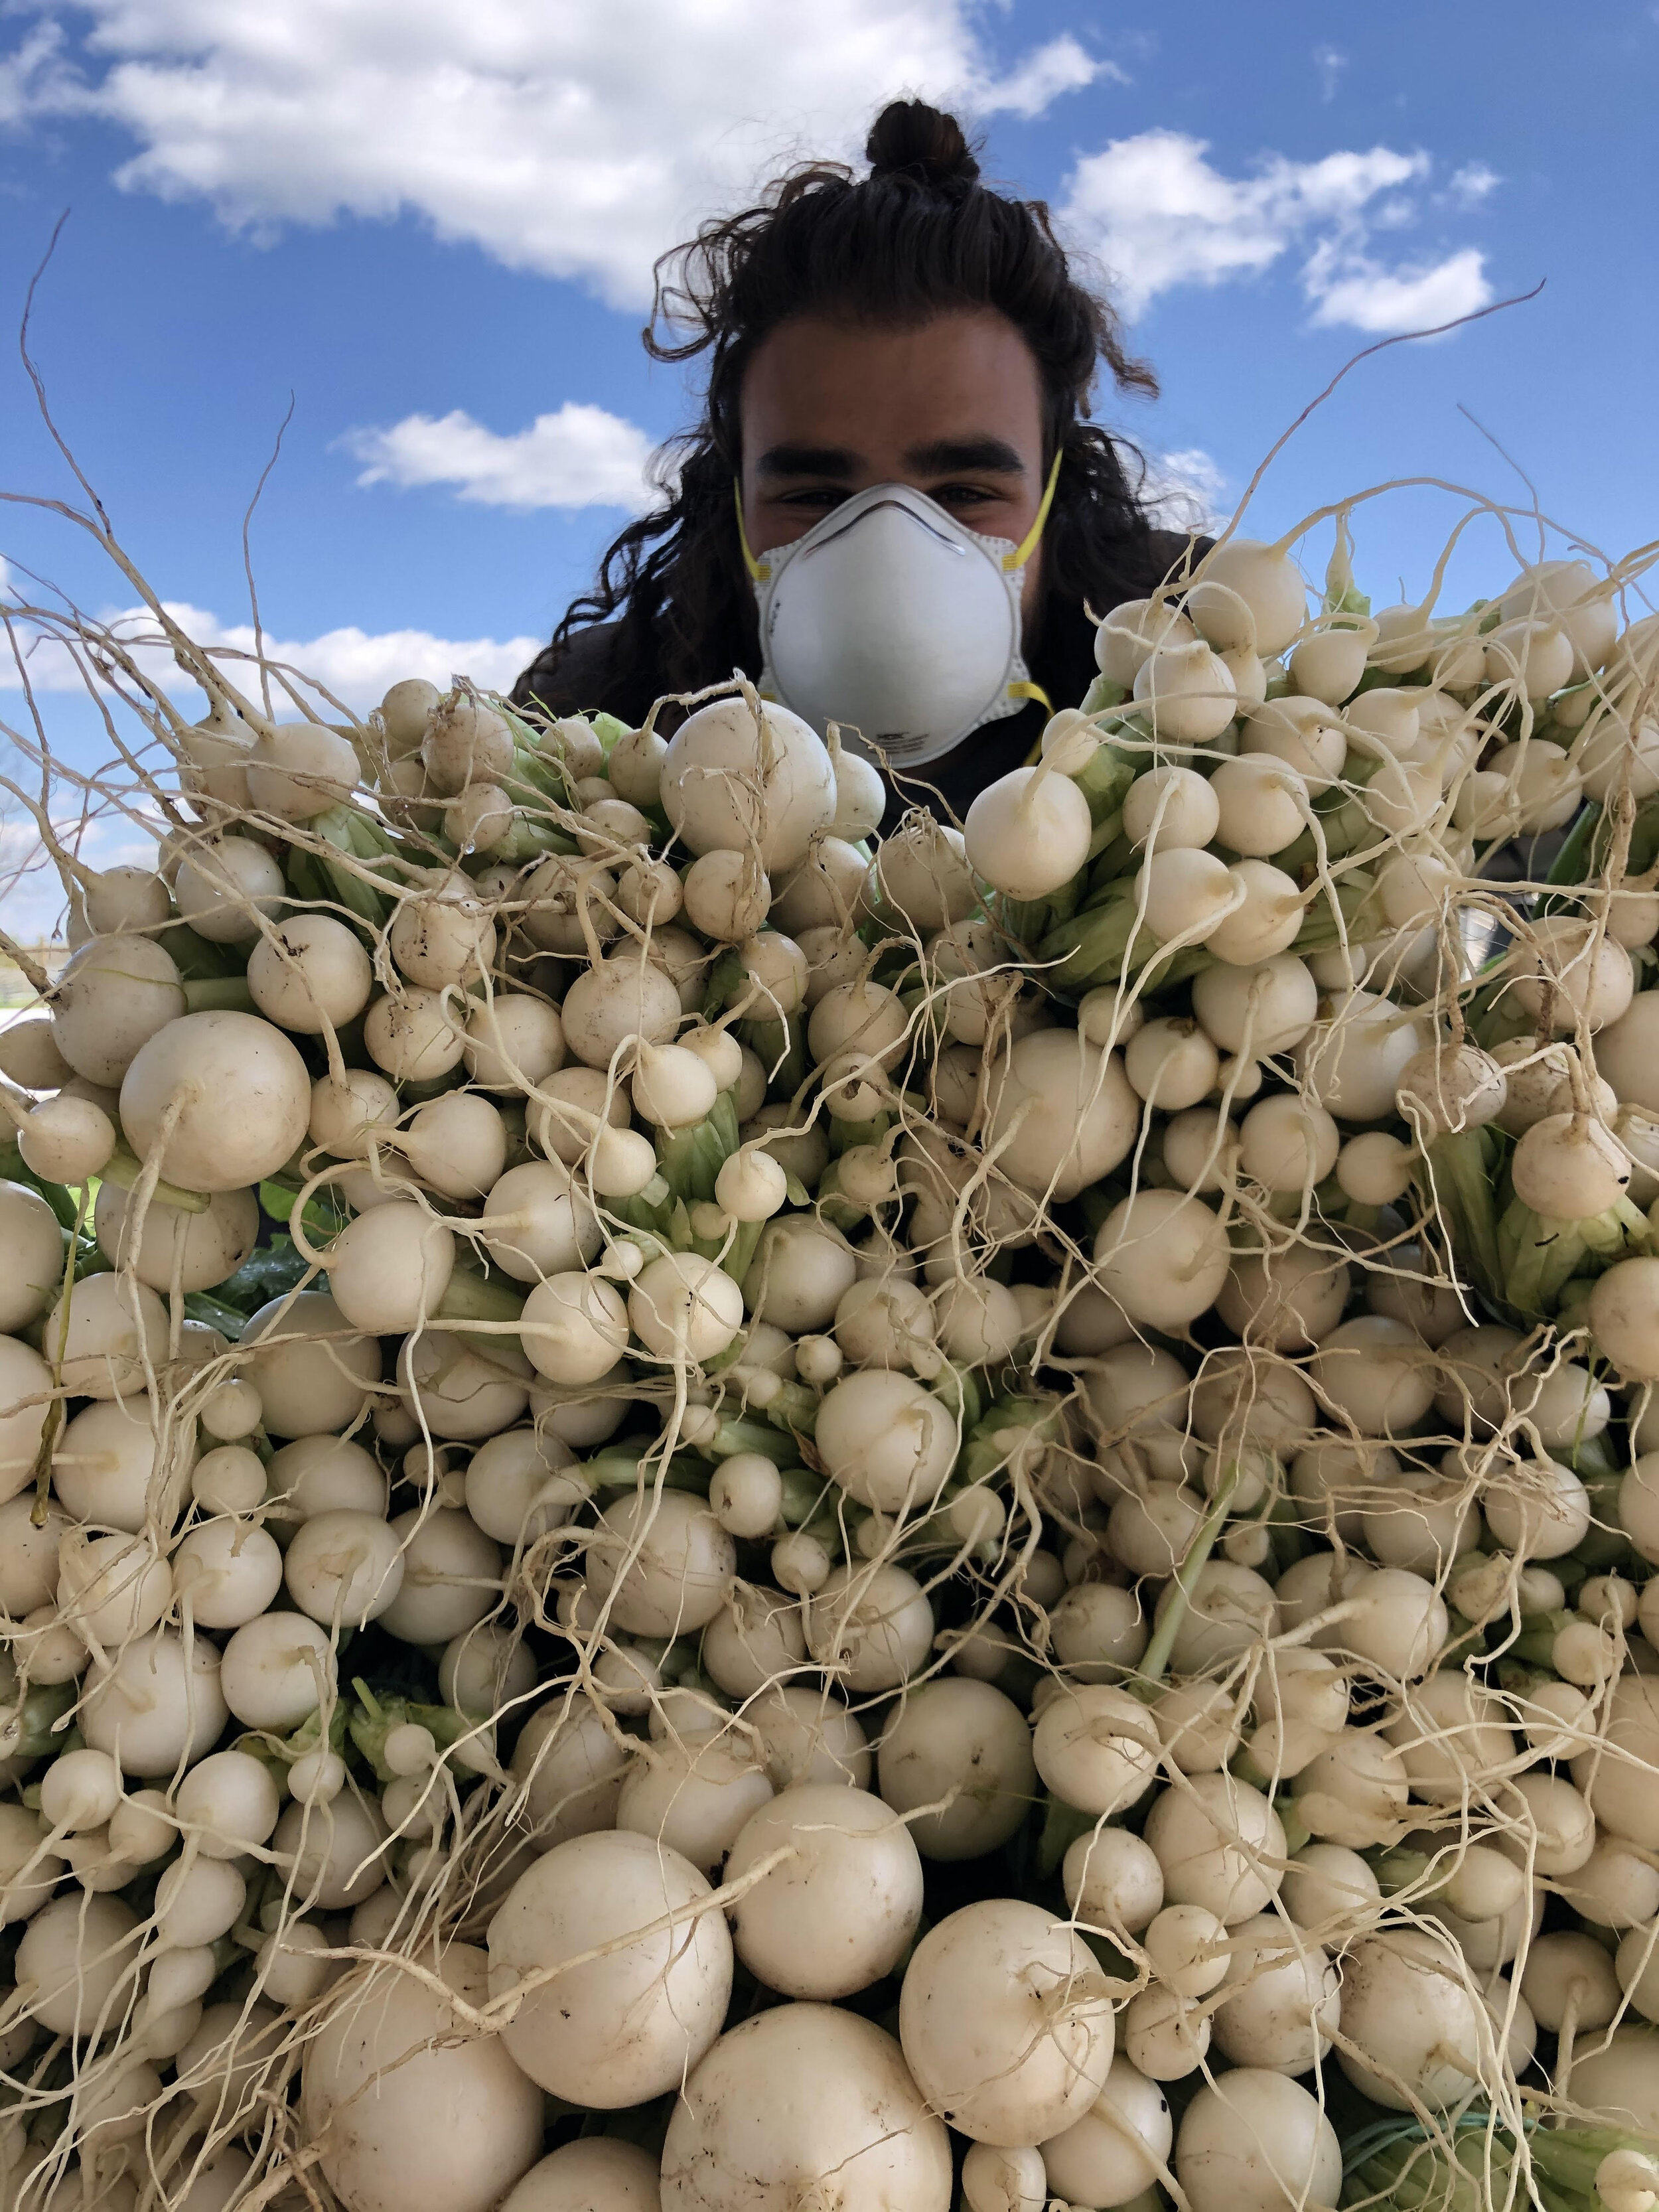  The BCCF taking proper COVID-19 precautions while getting turnips ready to donate to the food bank.   